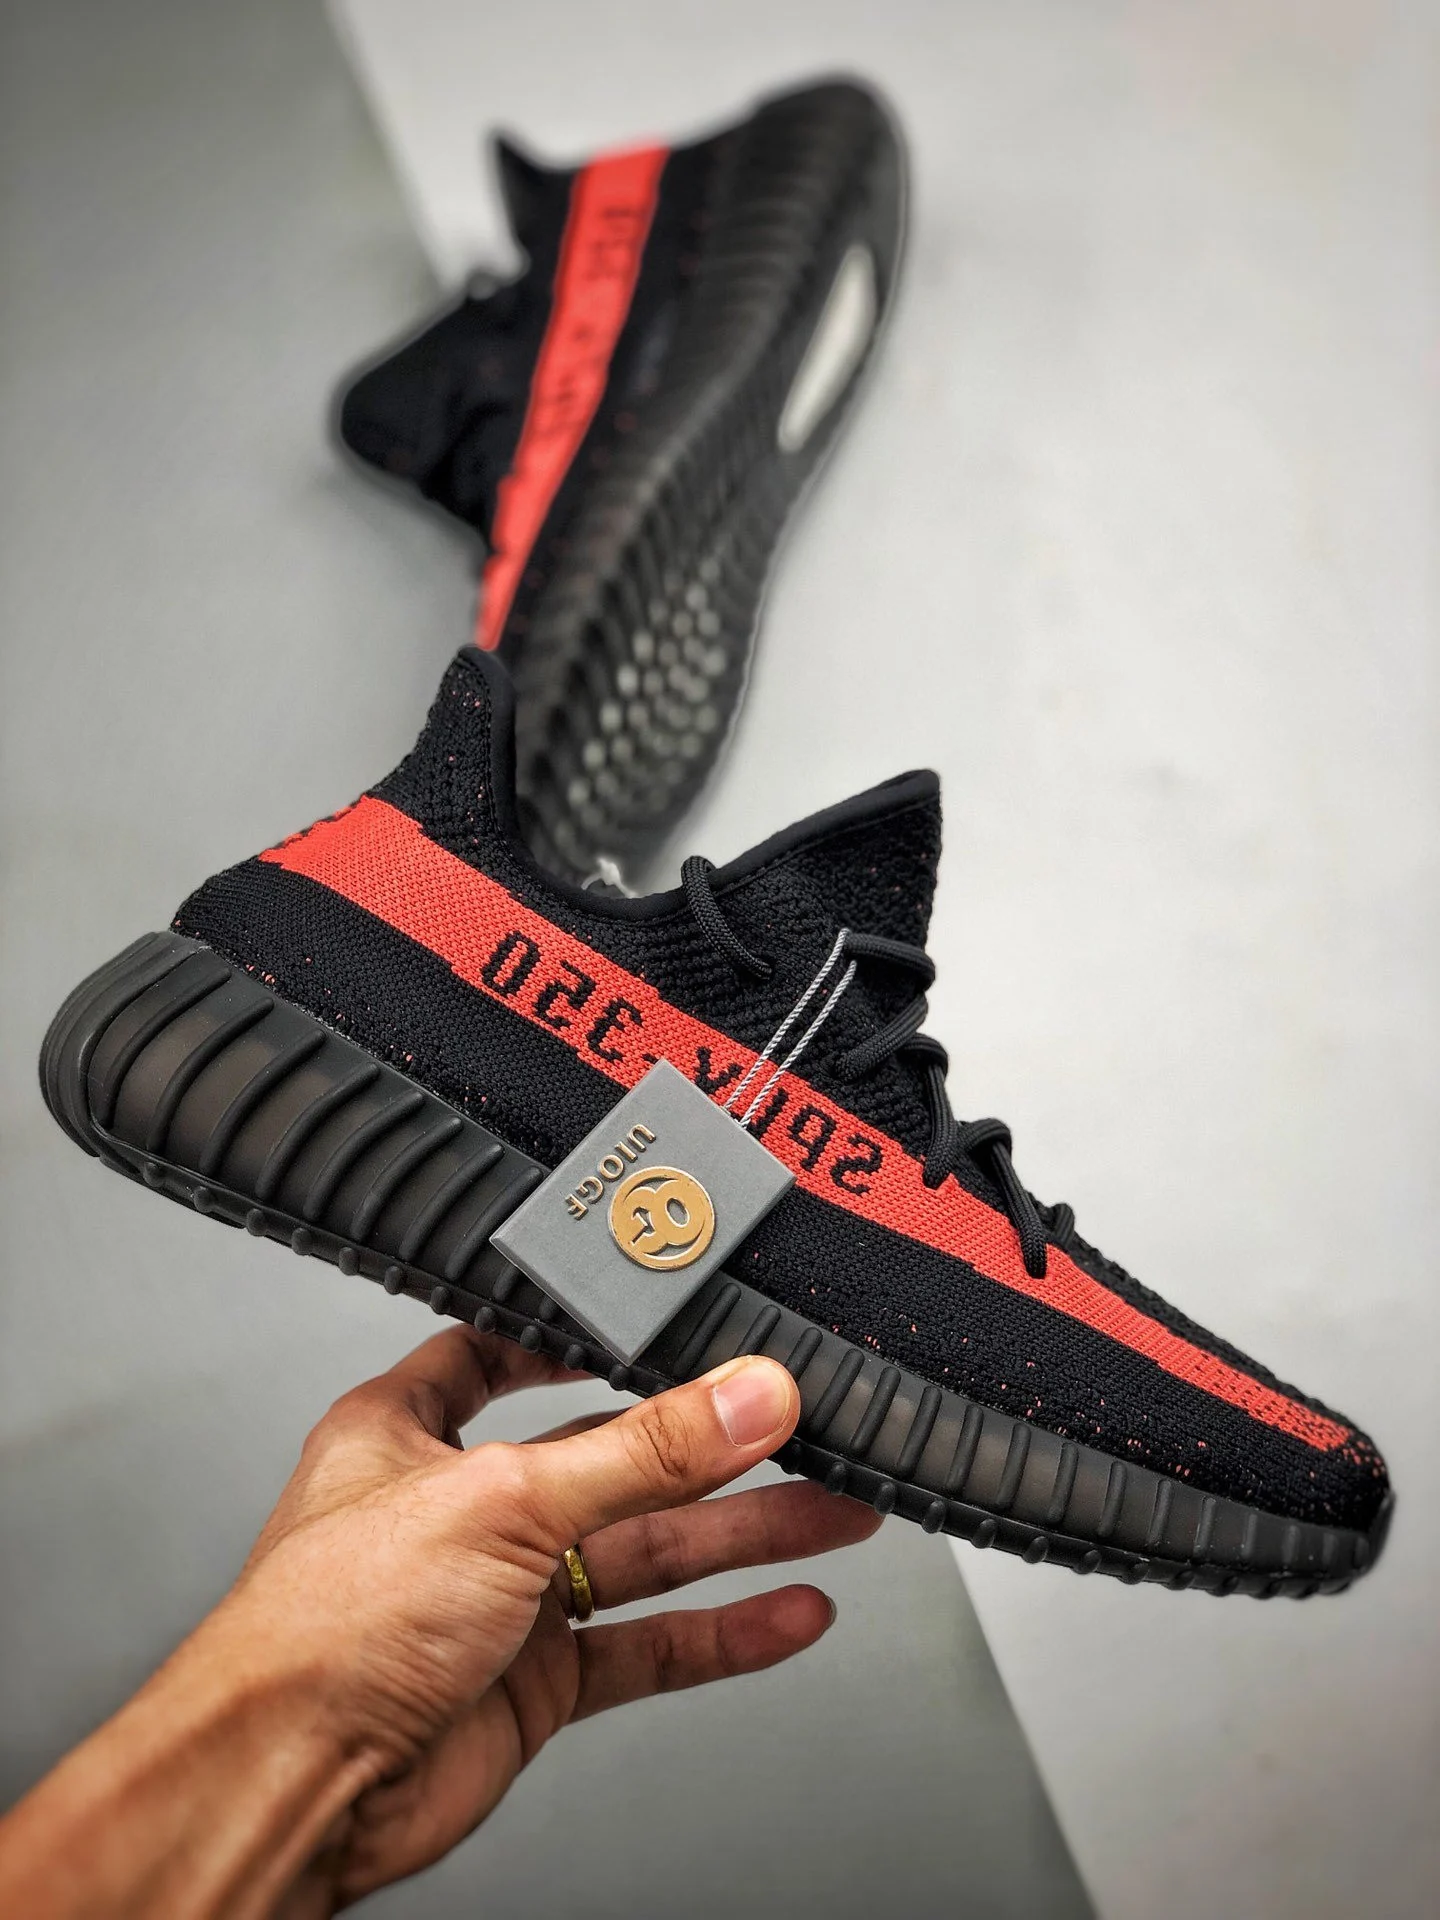 Adidas Yeezy Boost 350 V2 Black Red BY9612 For Sale